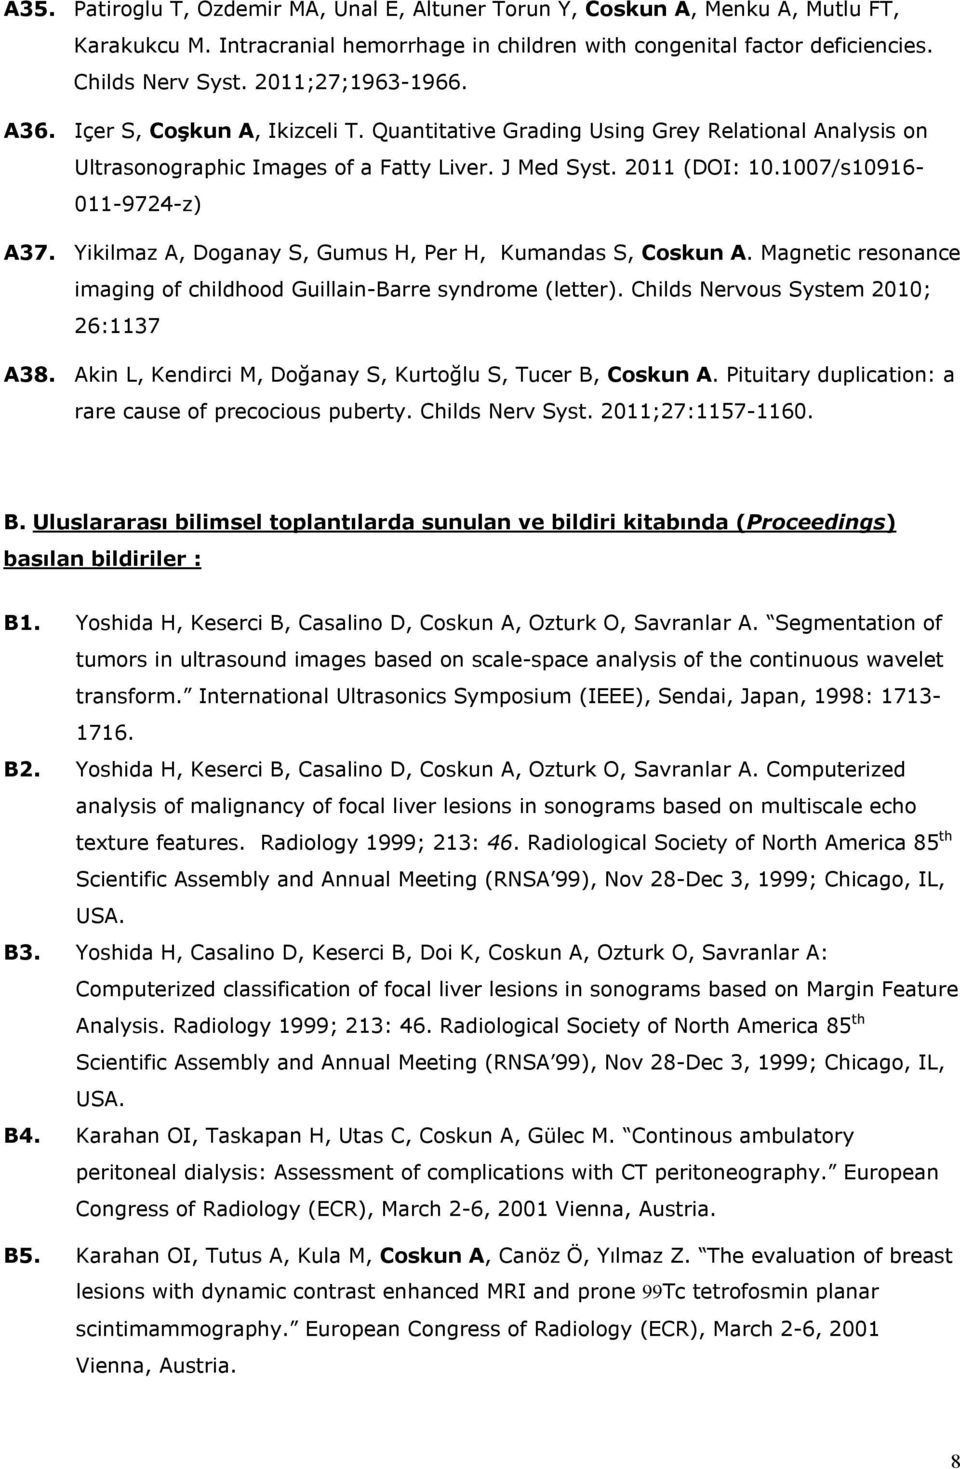 1007/s10916-011-9724-z) A37. Yikilmaz A, Doganay S, Gumus H, Per H, Kumandas S, Coskun A. Magnetic resonance imaging of childhood Guillain-Barre syndrome (letter).